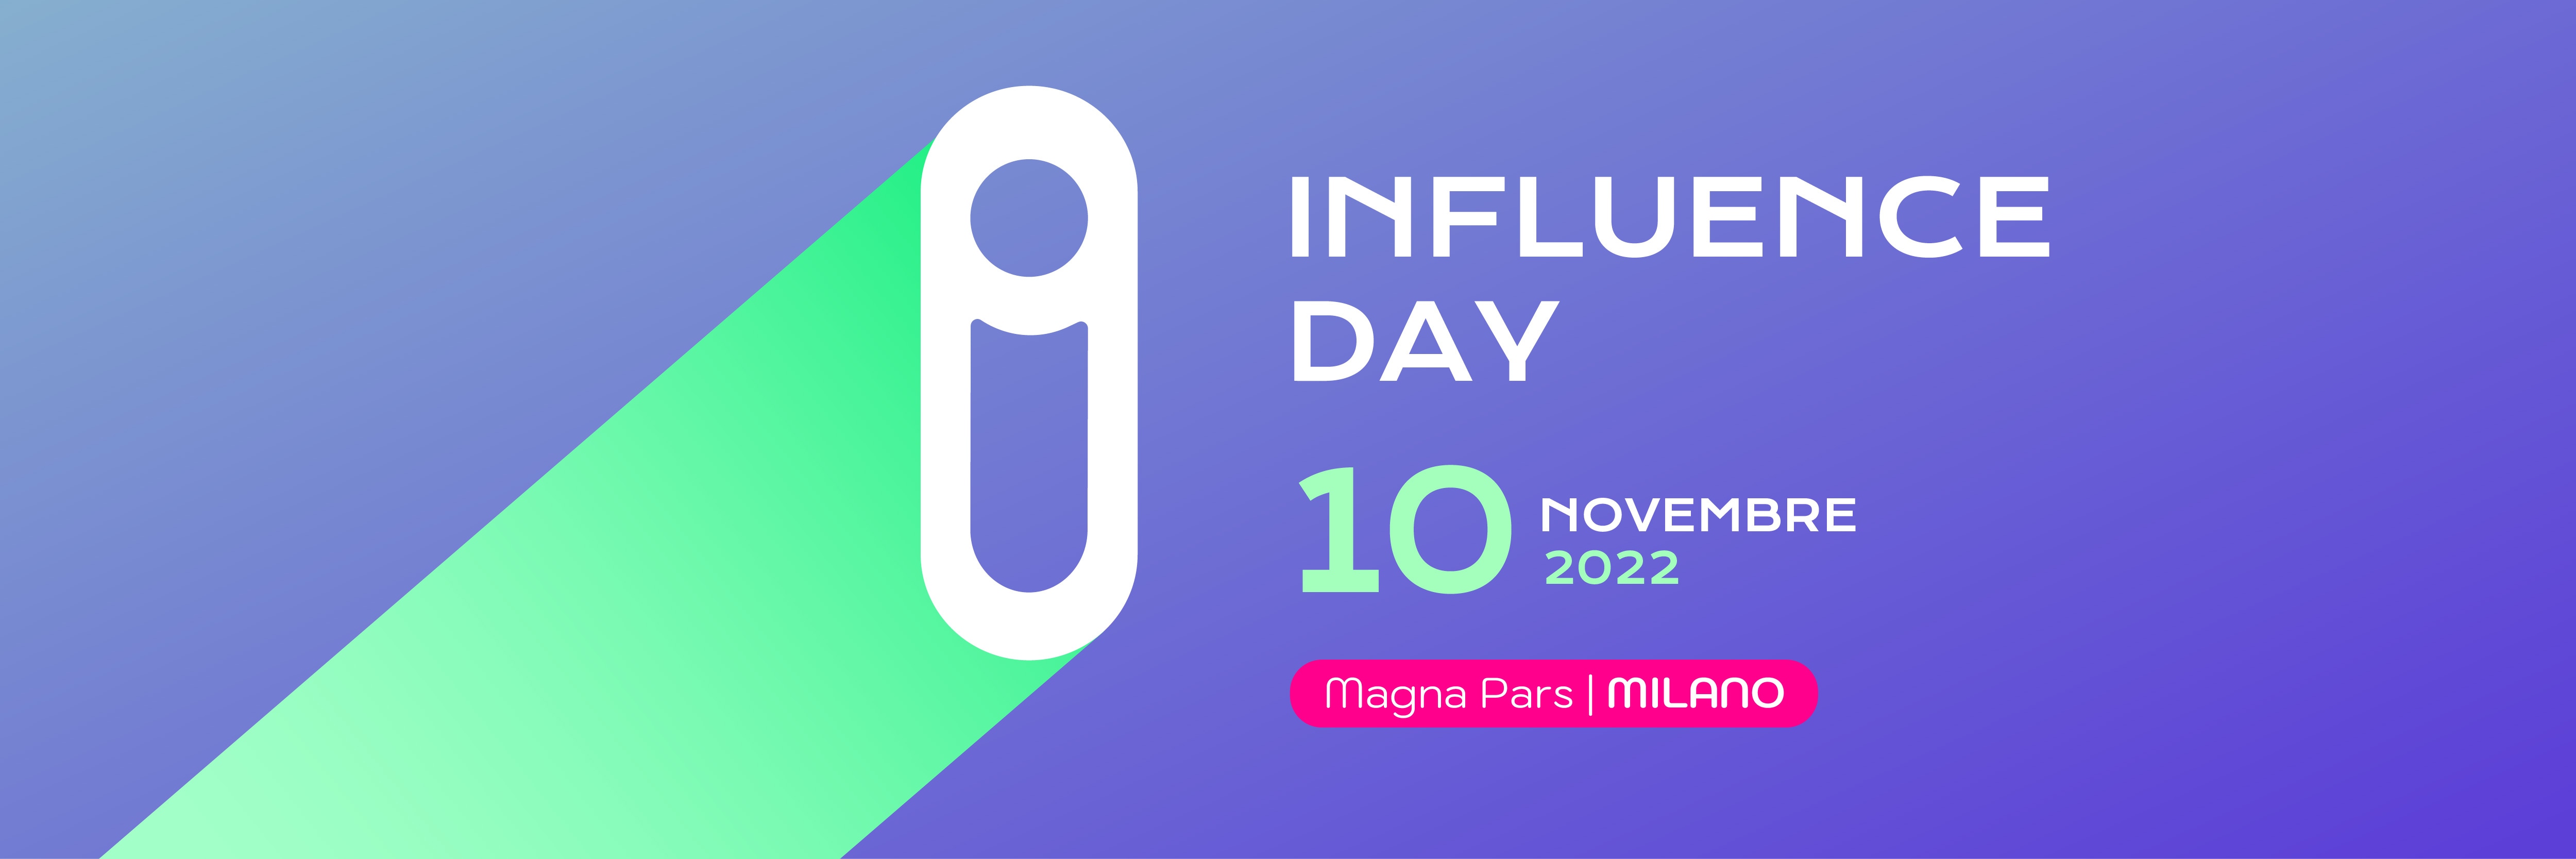 Influence day